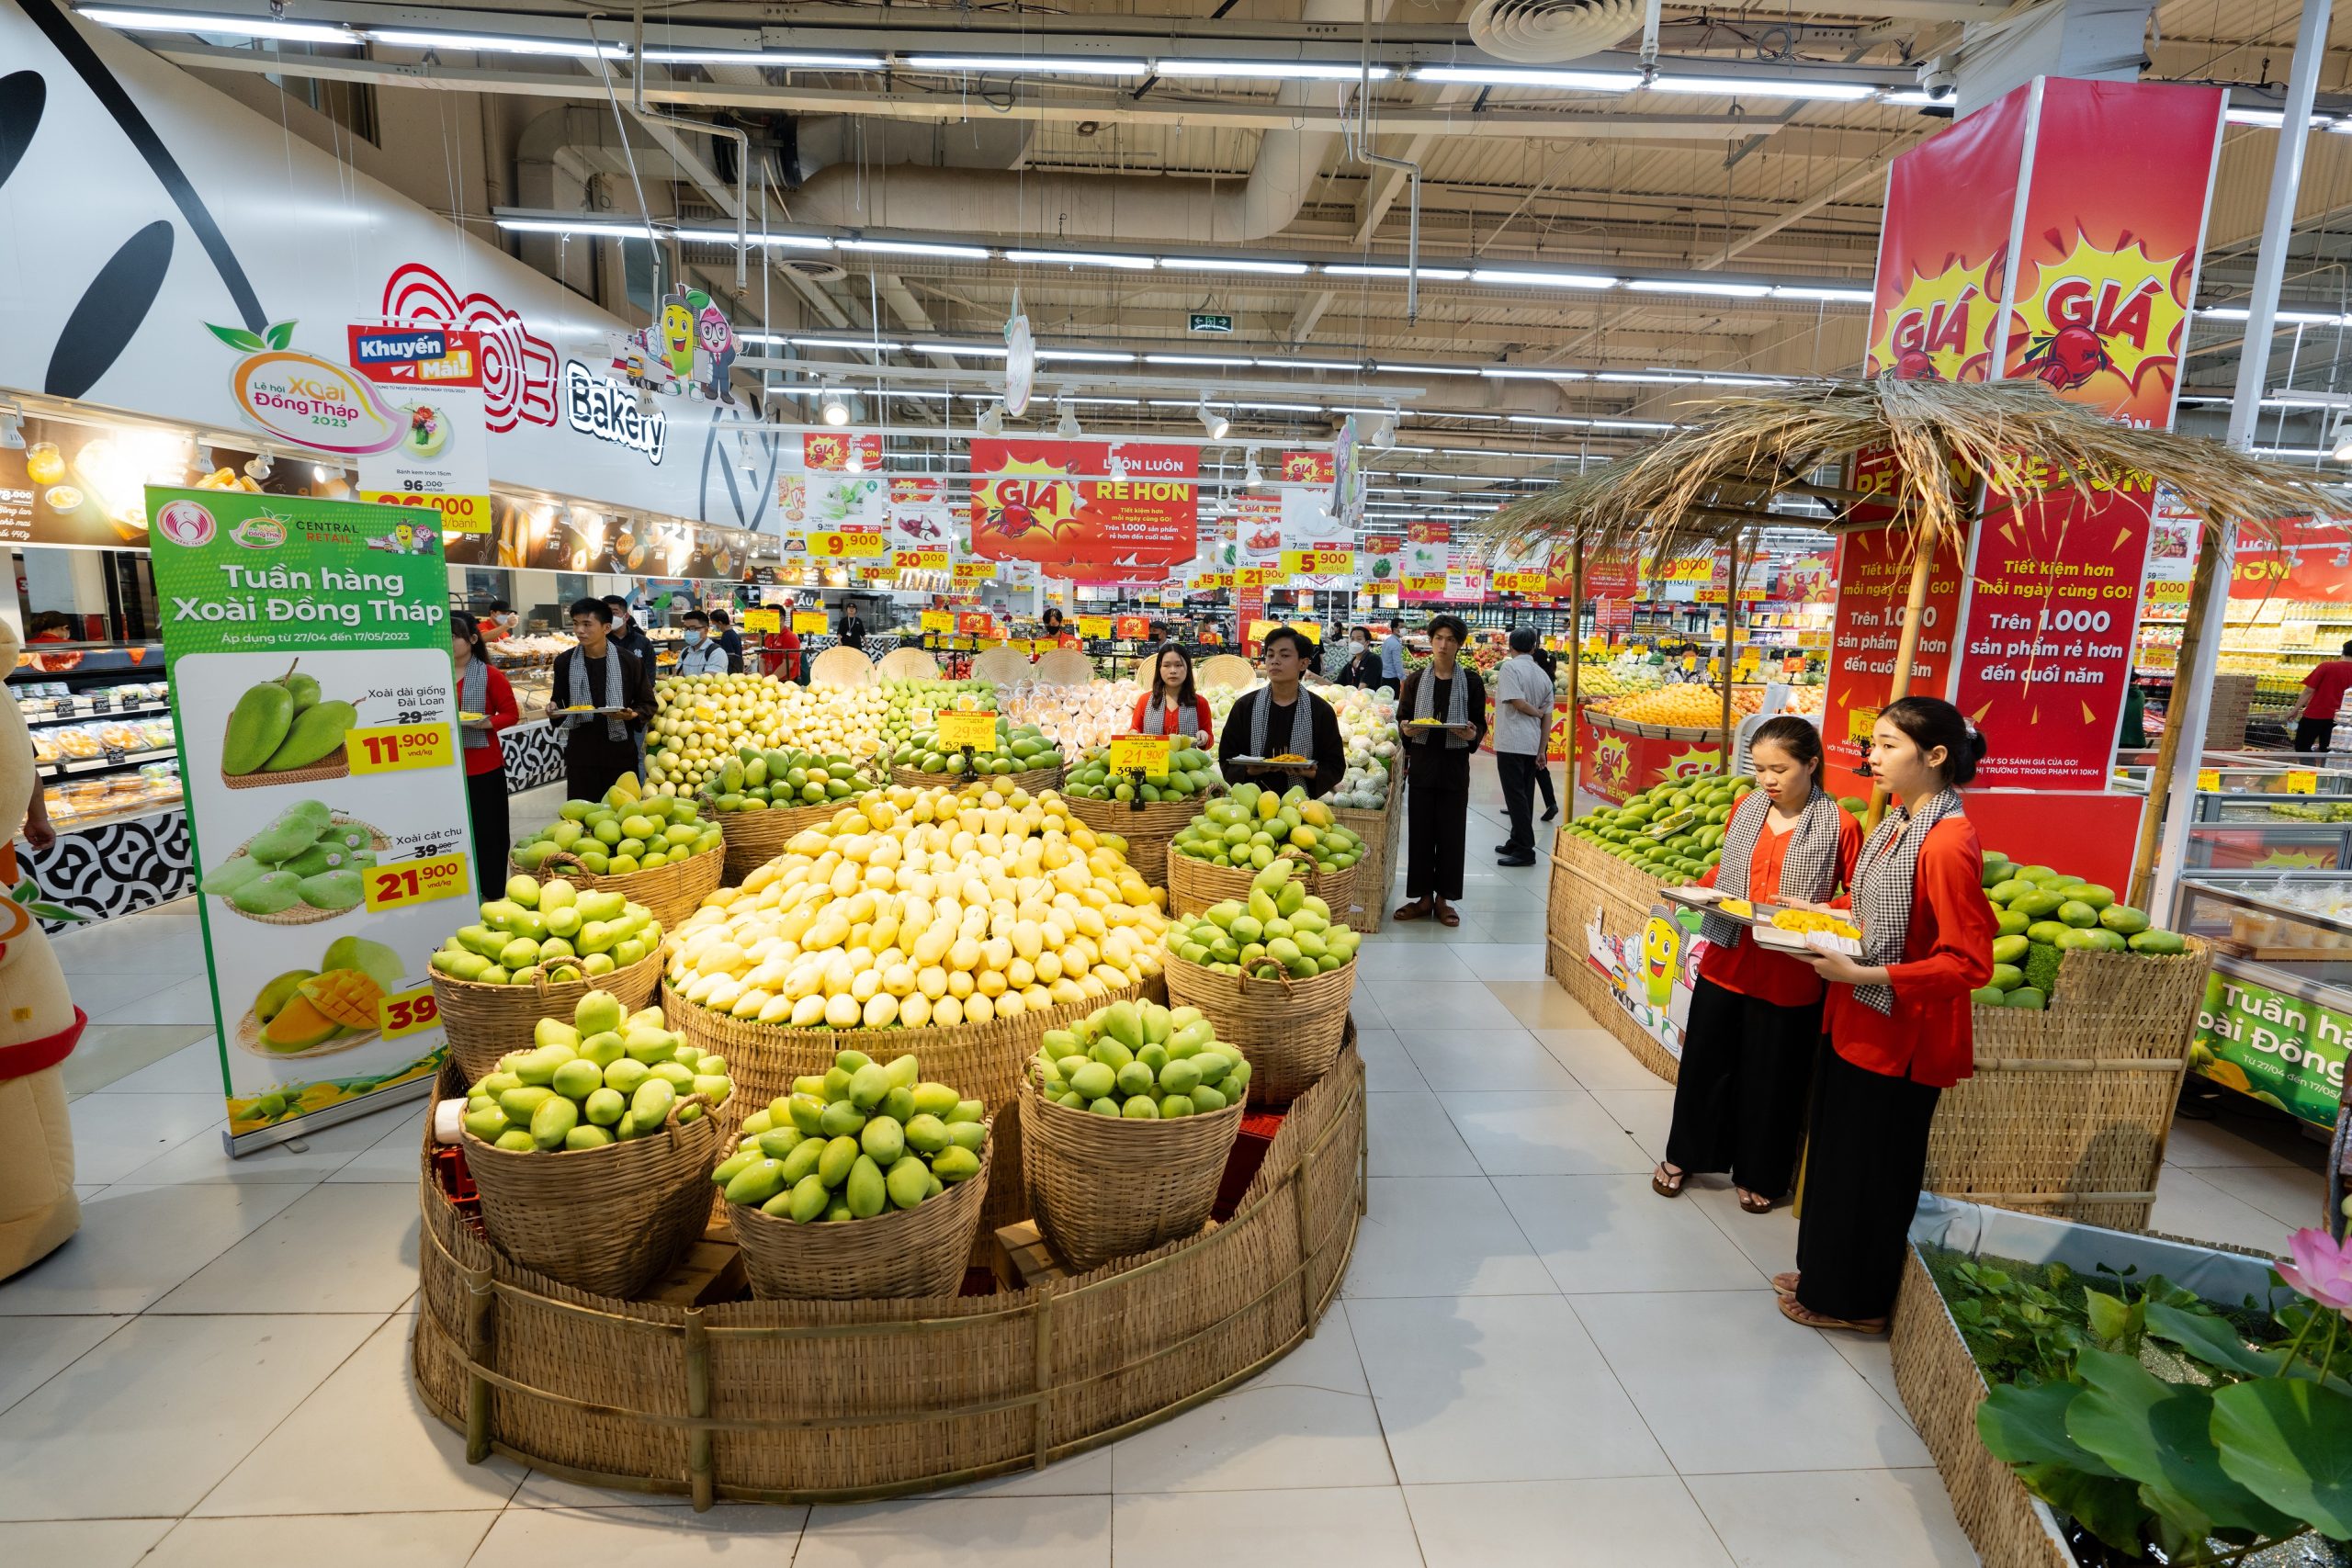 “Dong Thap Mango Week” at our retail chain stores of GO!, Big C, and Tops Market